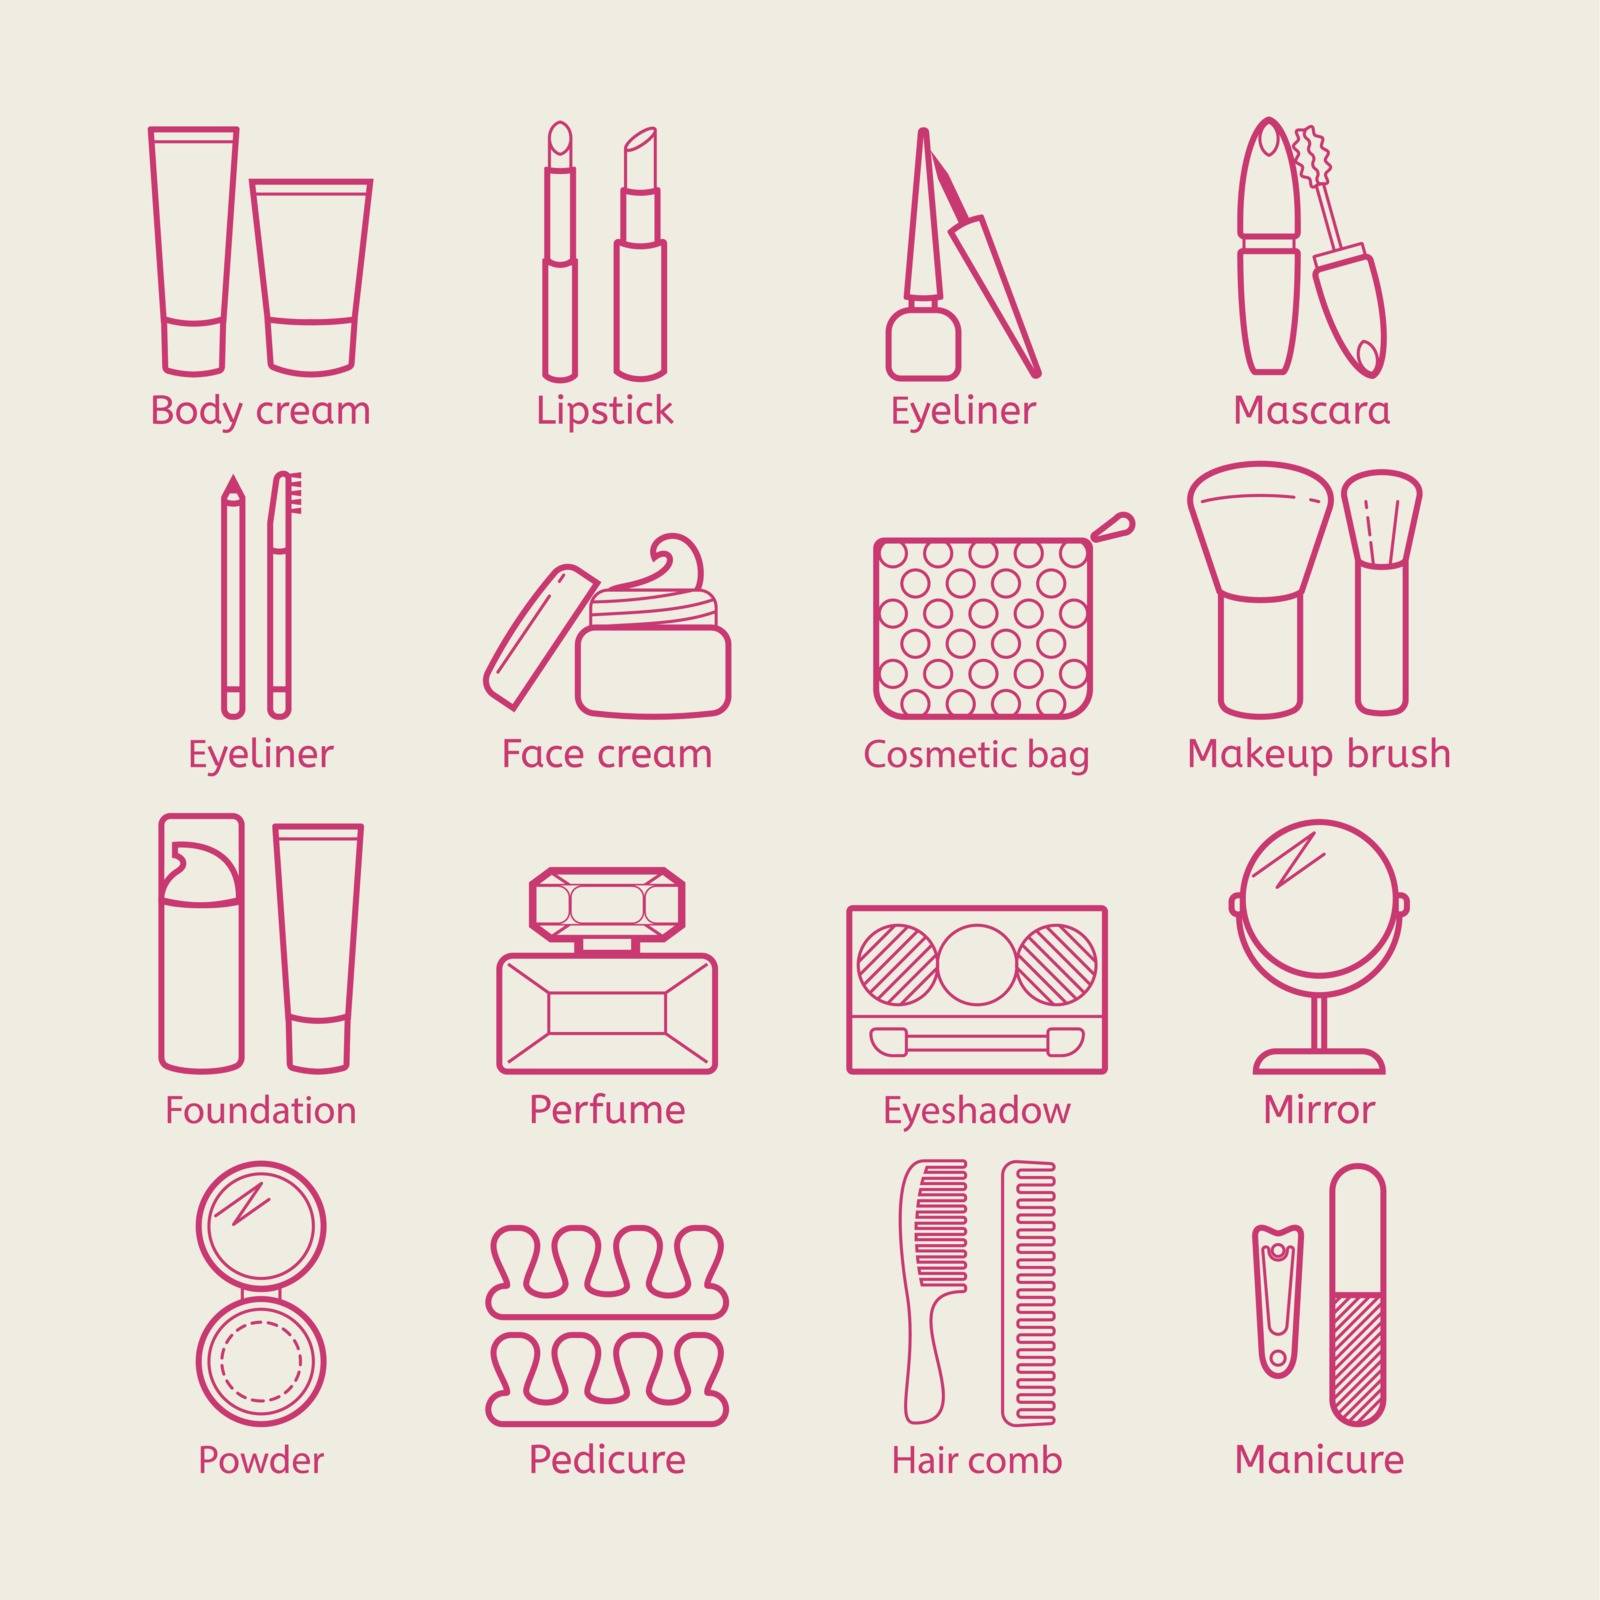 Vector cosmetic icons. Mascara, lipstick, powder, eye shadow, perfume, cream, foundation, eyeliner, mirror, hair comb and other make-up items. Makeup thin linear signs for manicure, pedicure and Visage.